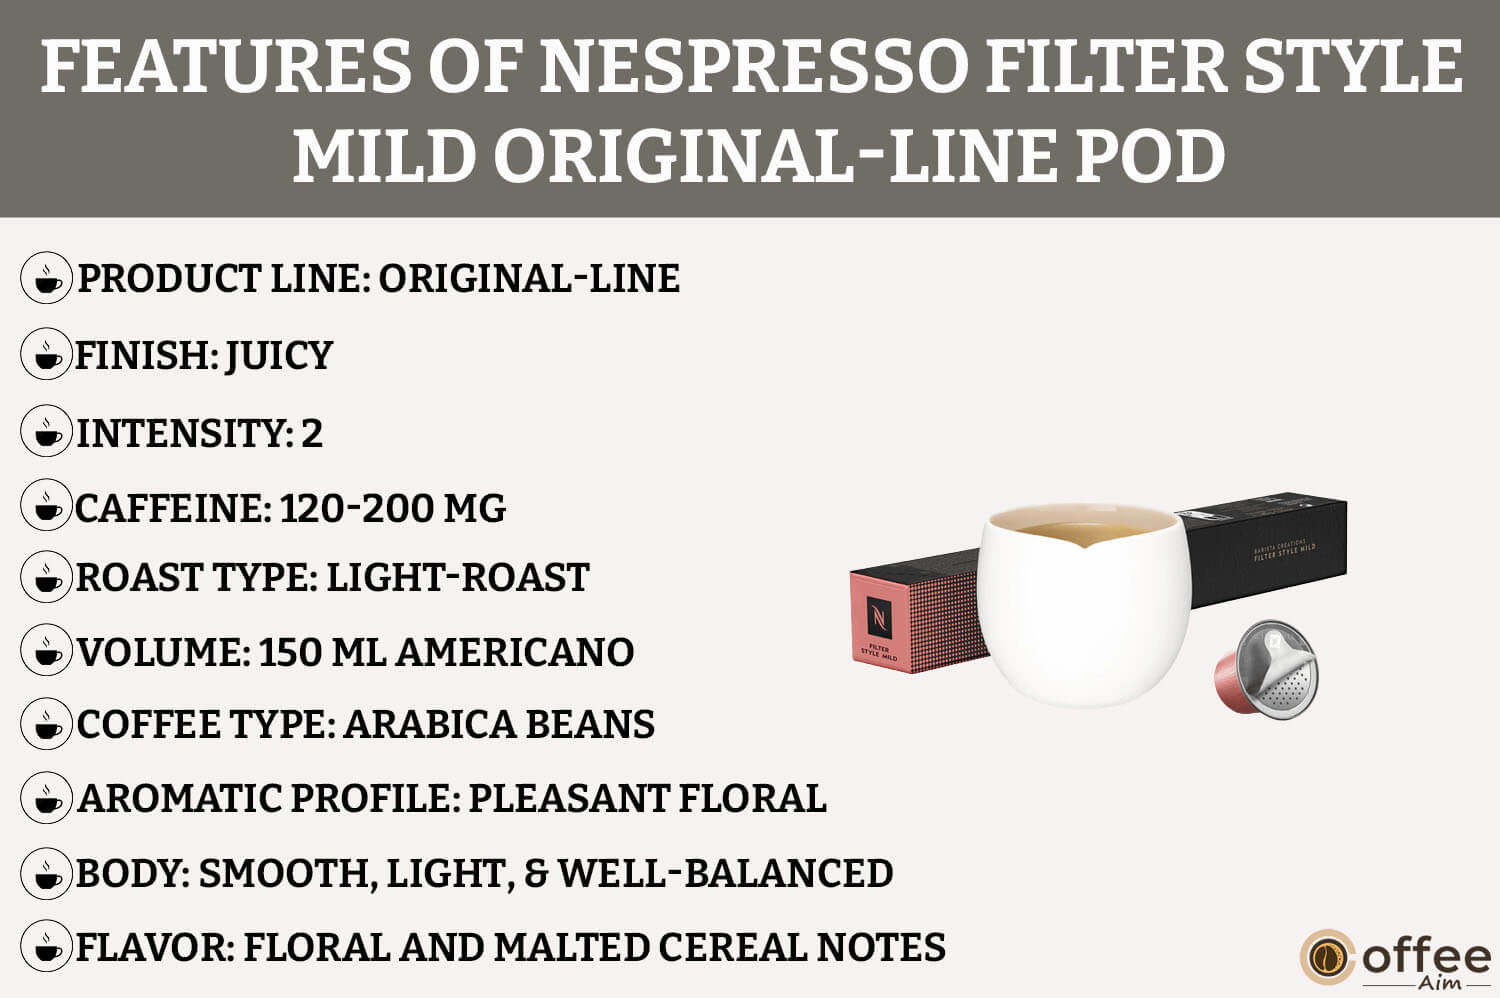 This image illustrates the key features of the Filter Style Mild Nespresso OriginalLine Pod, providing insights for our review.